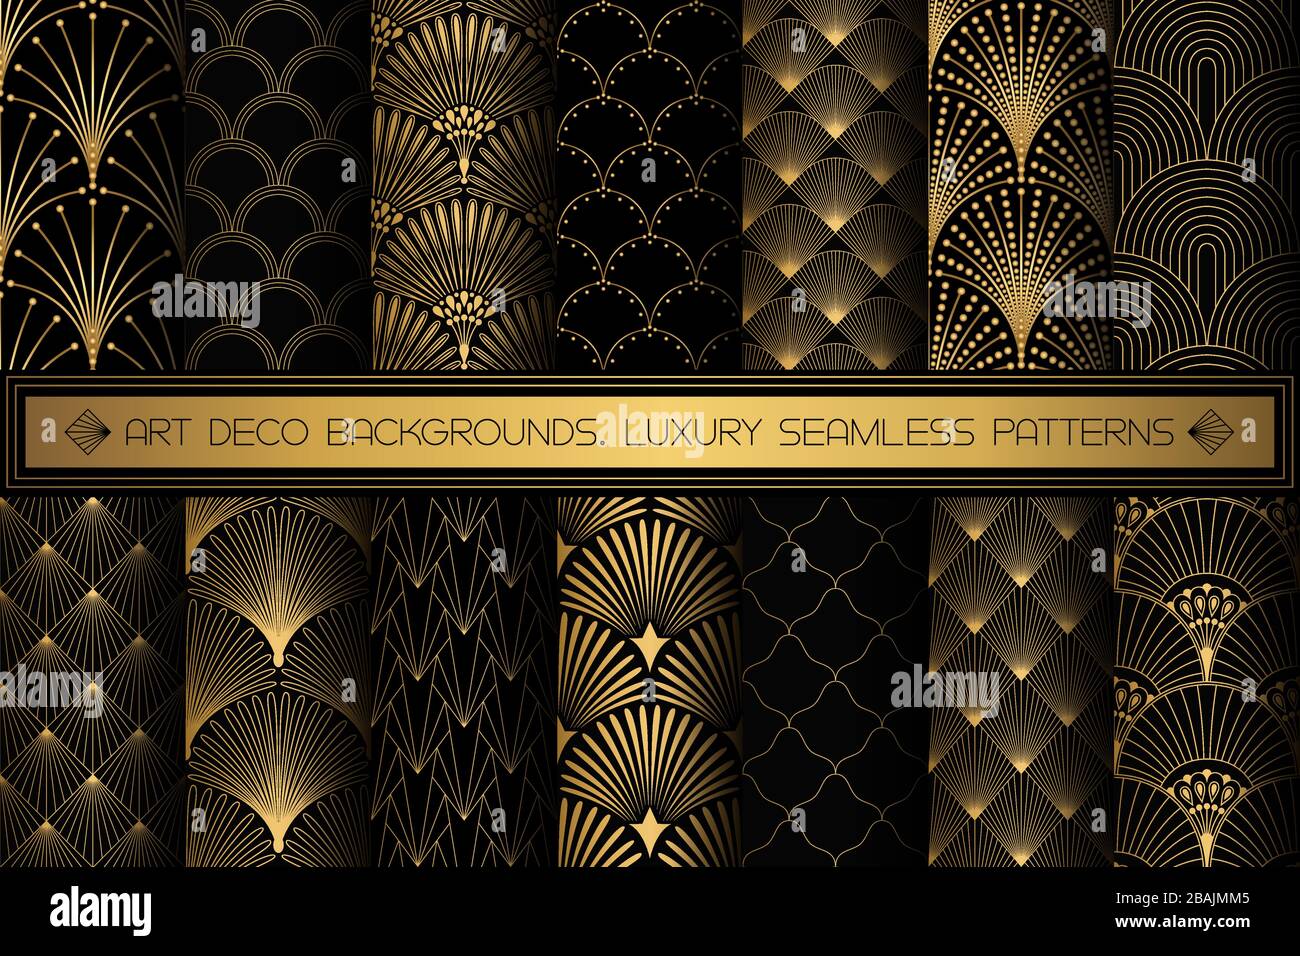 Art Deco Patterns. Seamless black and gold backgrounds Stock Vector